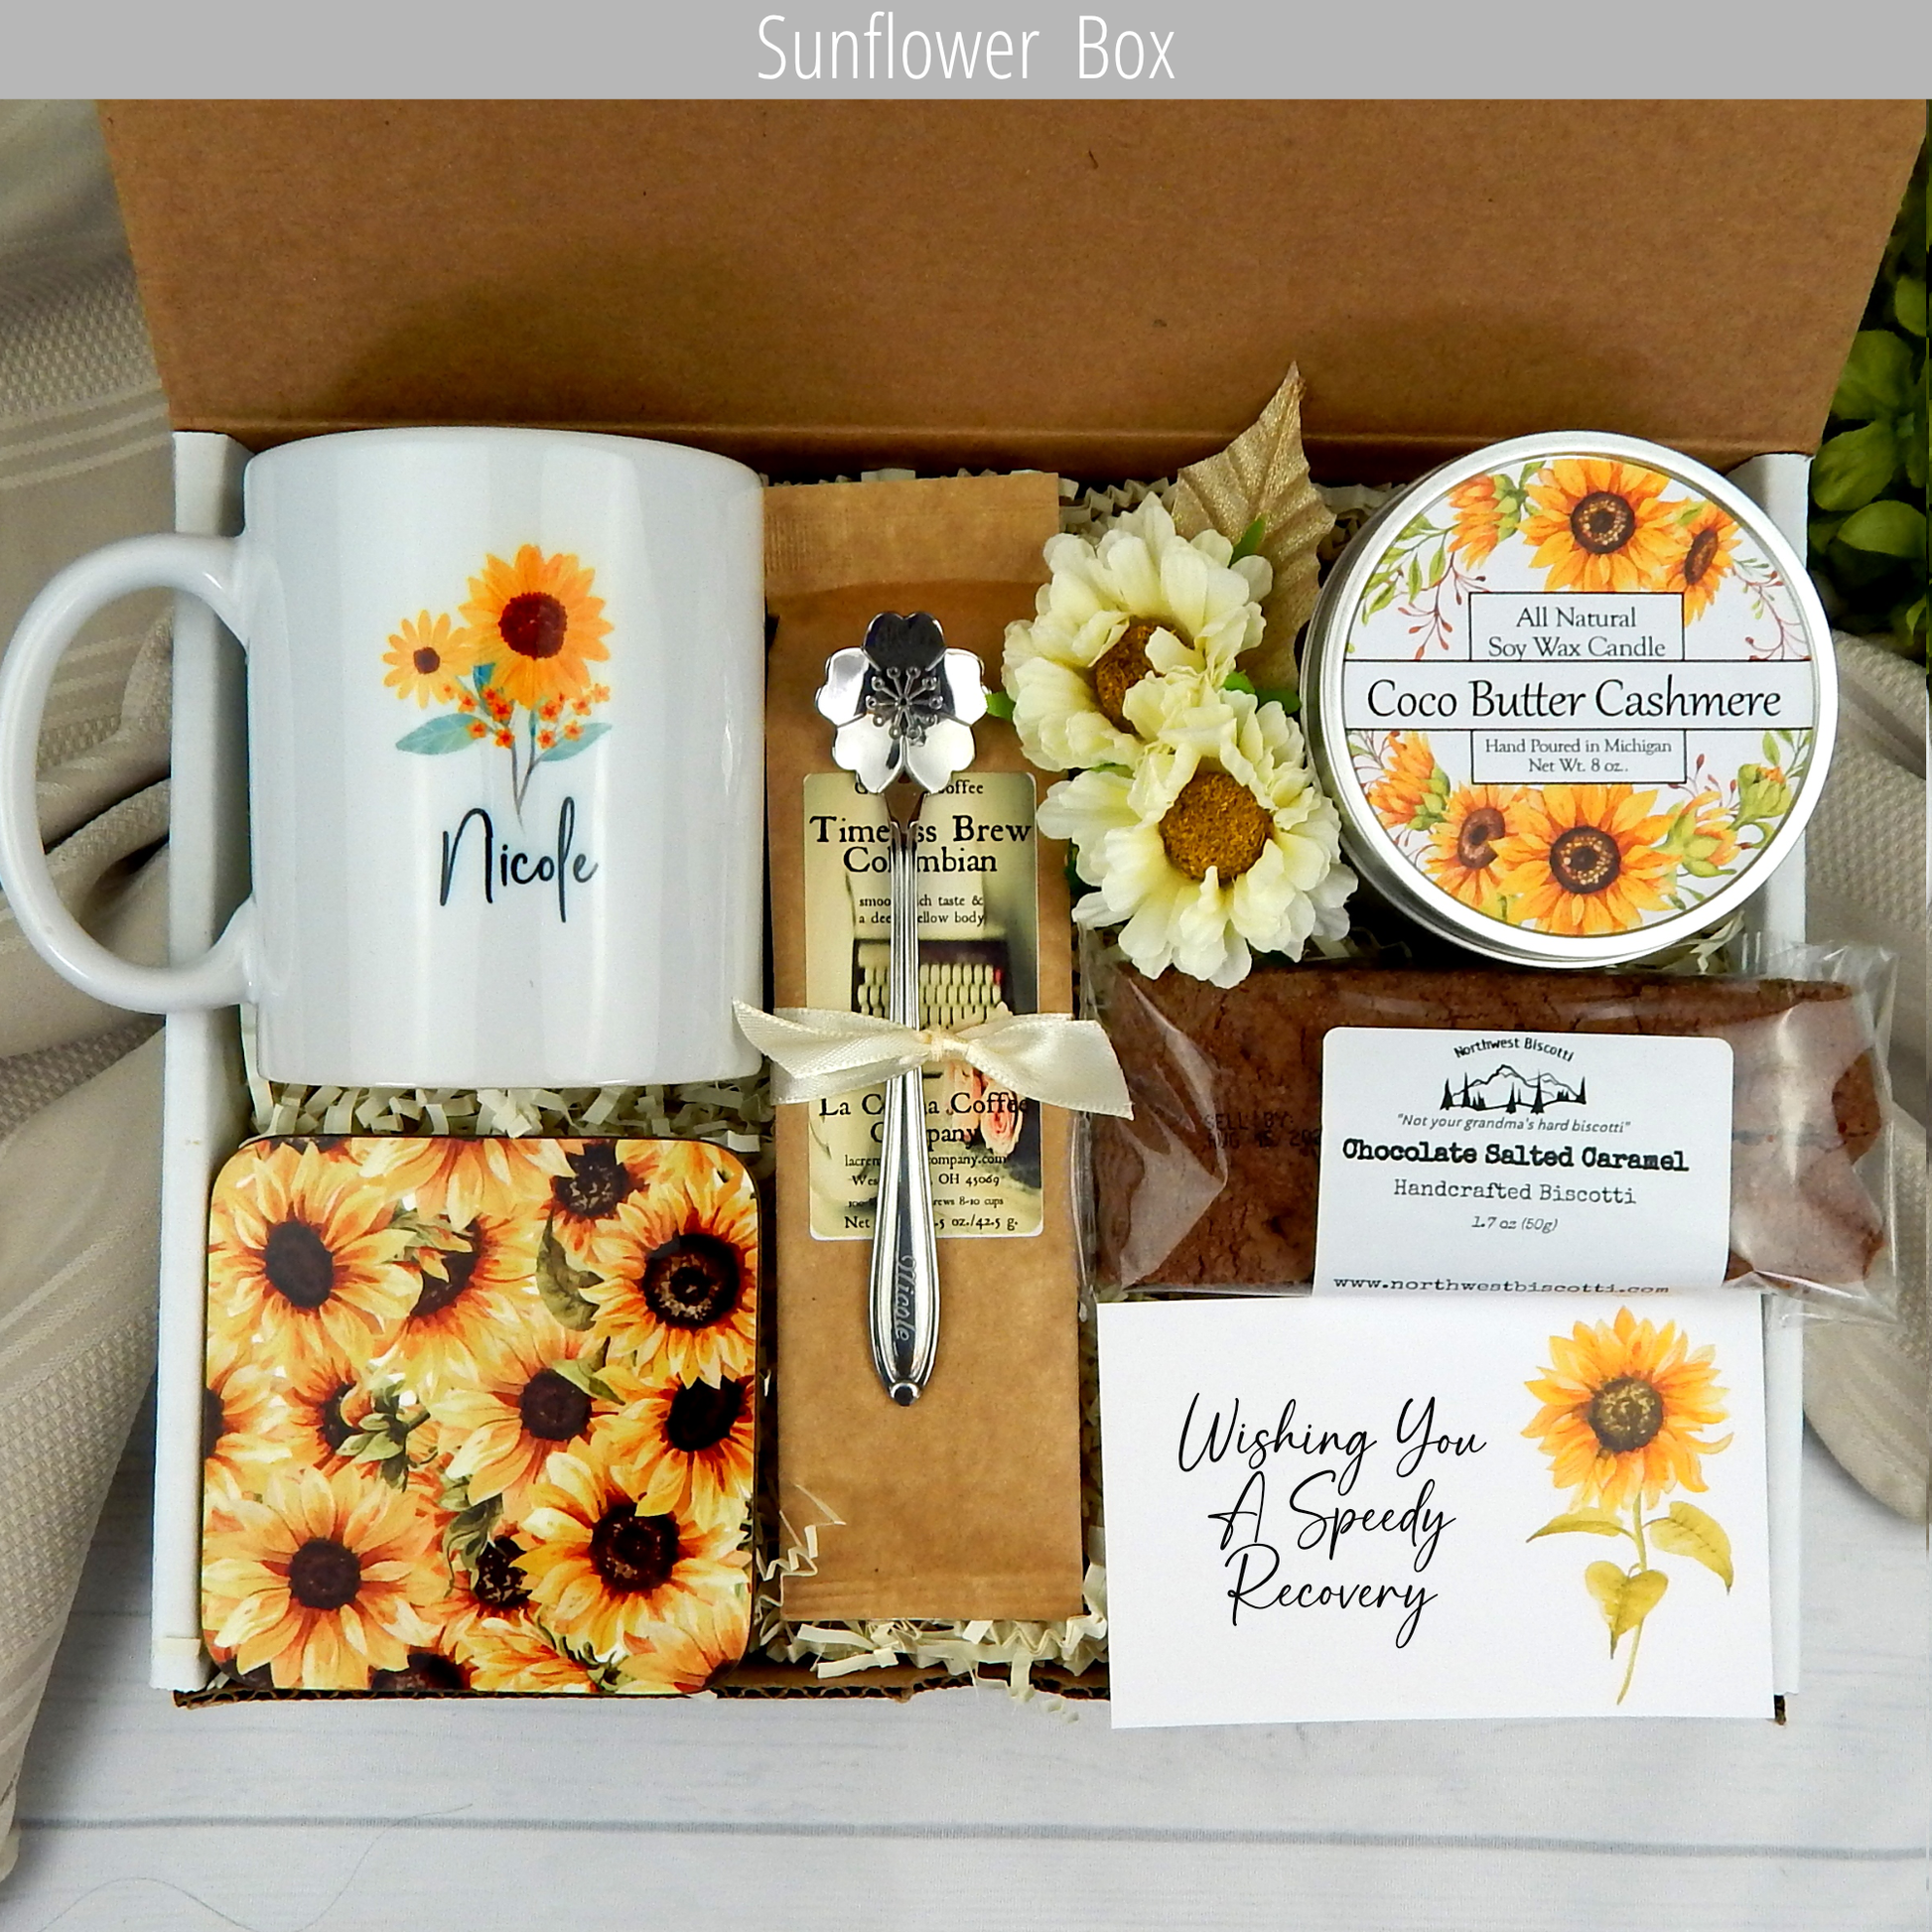 Get well soon: Gift basket for her with a personalized mug, coffee, and comforting treats for a speedy recovery.